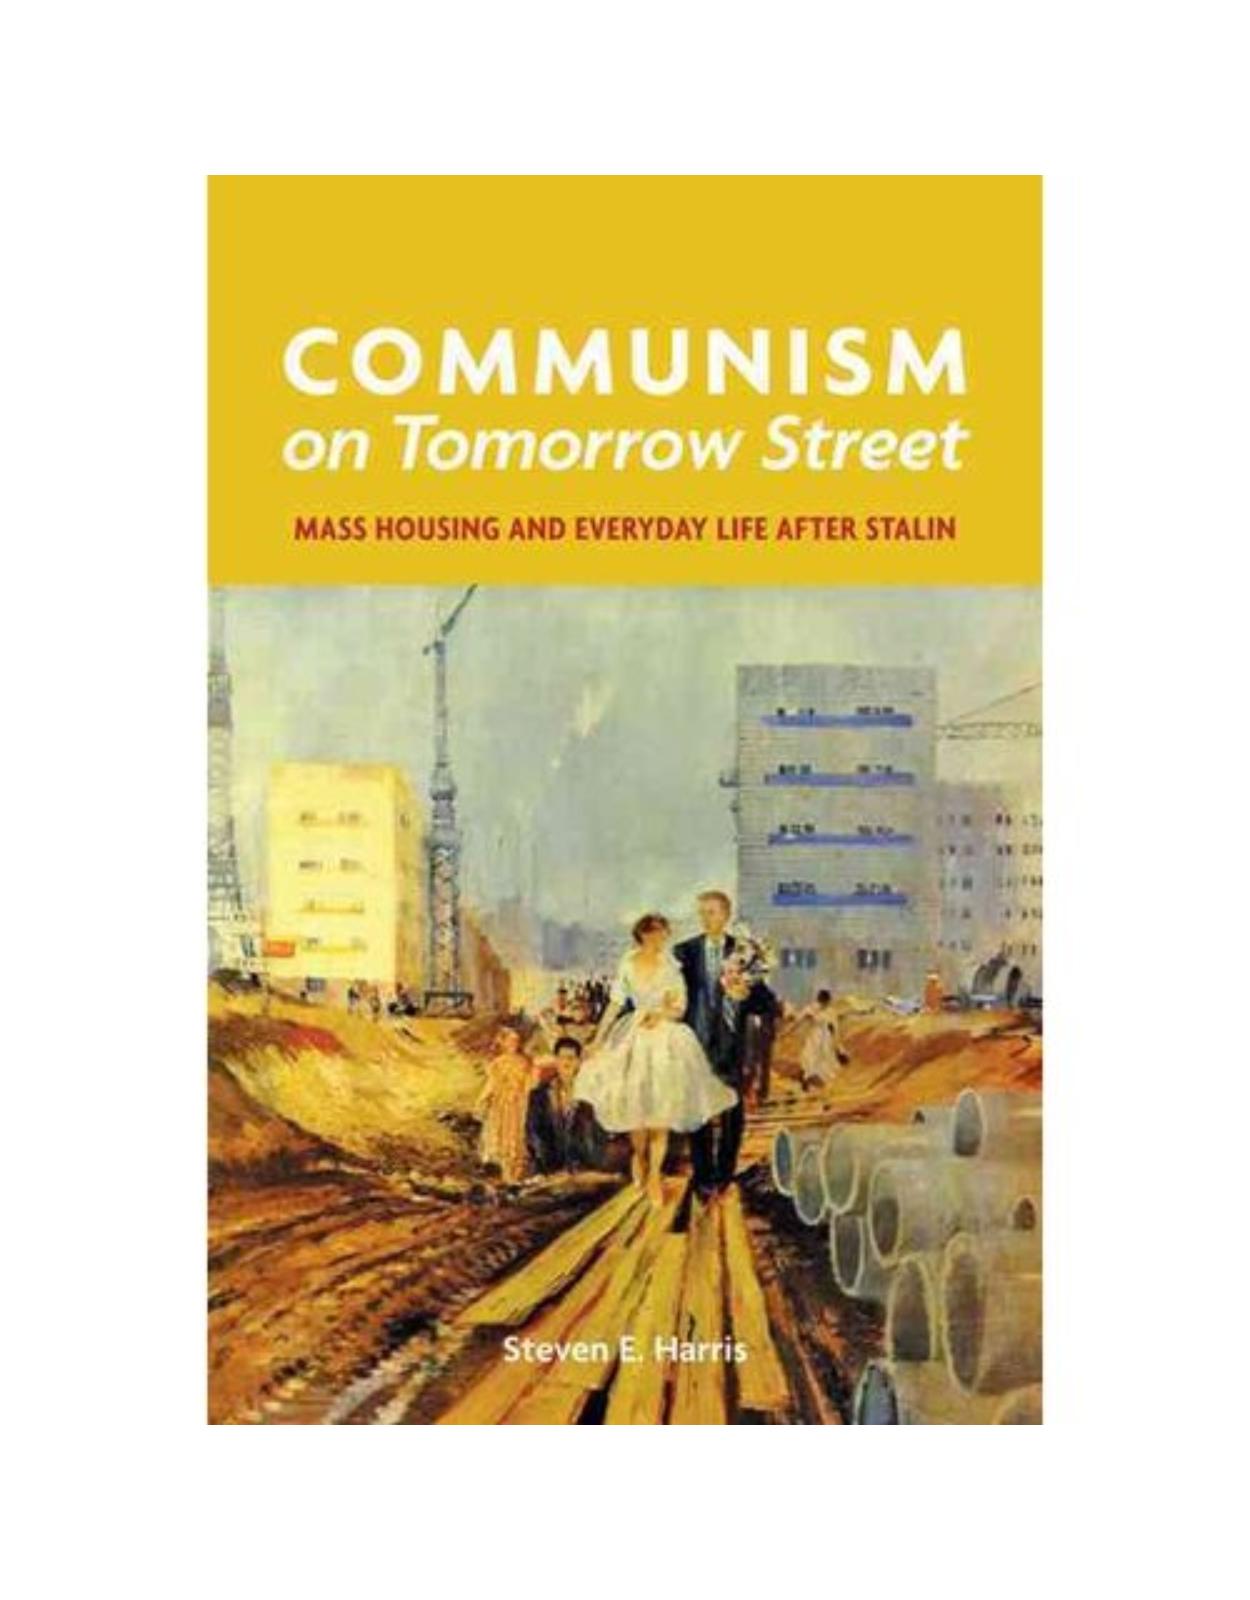 Communism on Tomorrow Street. Mass Housing and Everyday Life after Stalin